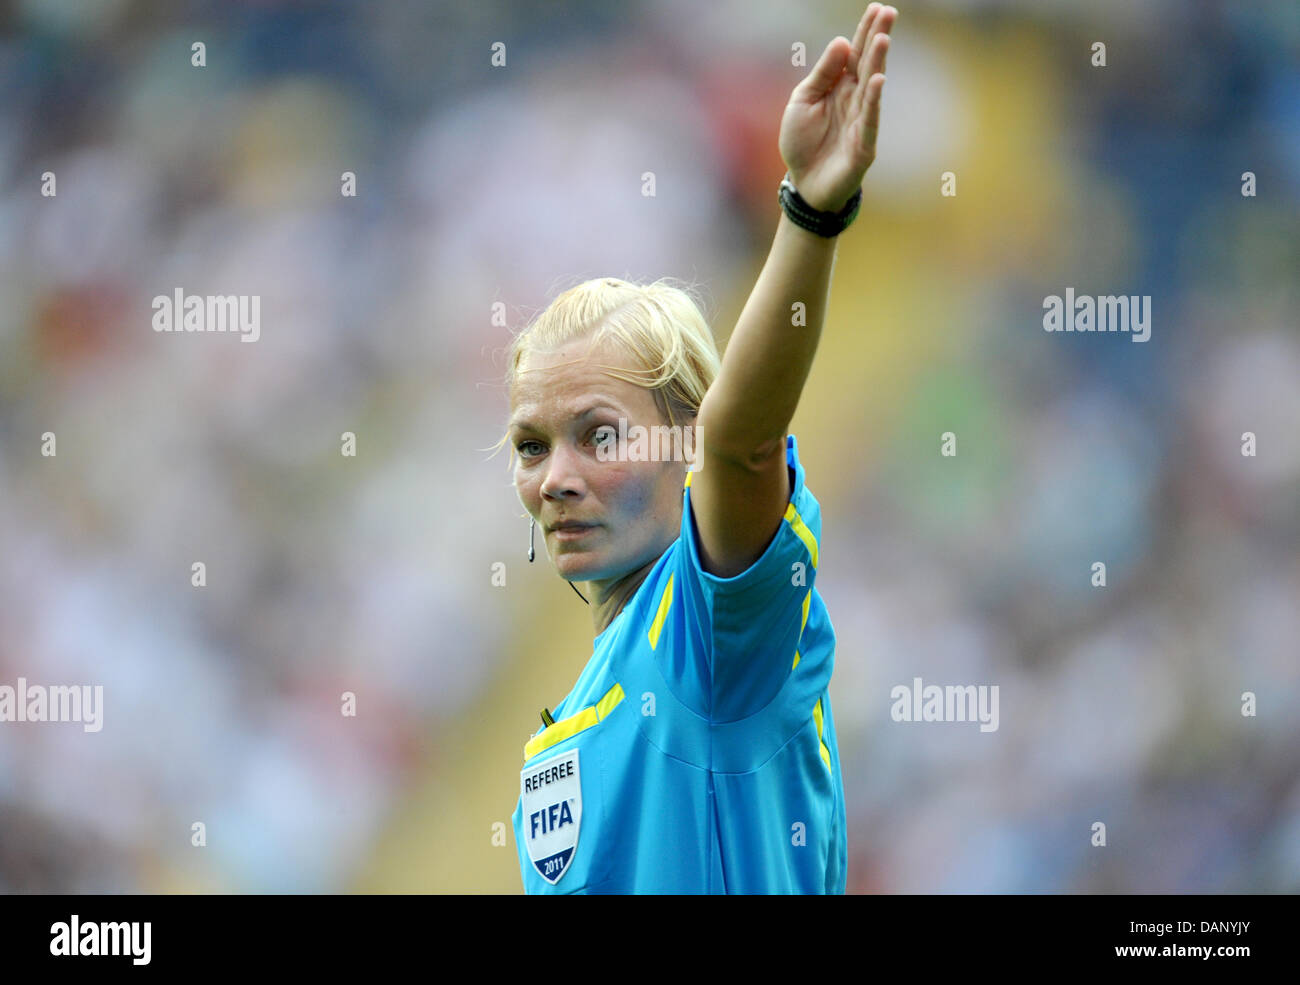 (FILE) - A file picture taken on 6 July 2011 shows soccer referee Bibiana Steinhaus during a FIFA Women's World Cup match of Brazil versus Ecuatorial Guinea in Frankfurt, Germany. Steinhaus will be referee in the finale of the world cup on 15 July 2011. The German soccer union's head of the referee commission, Fandel, stated that the DFB was proud and happy about the nomination. St Stock Photo